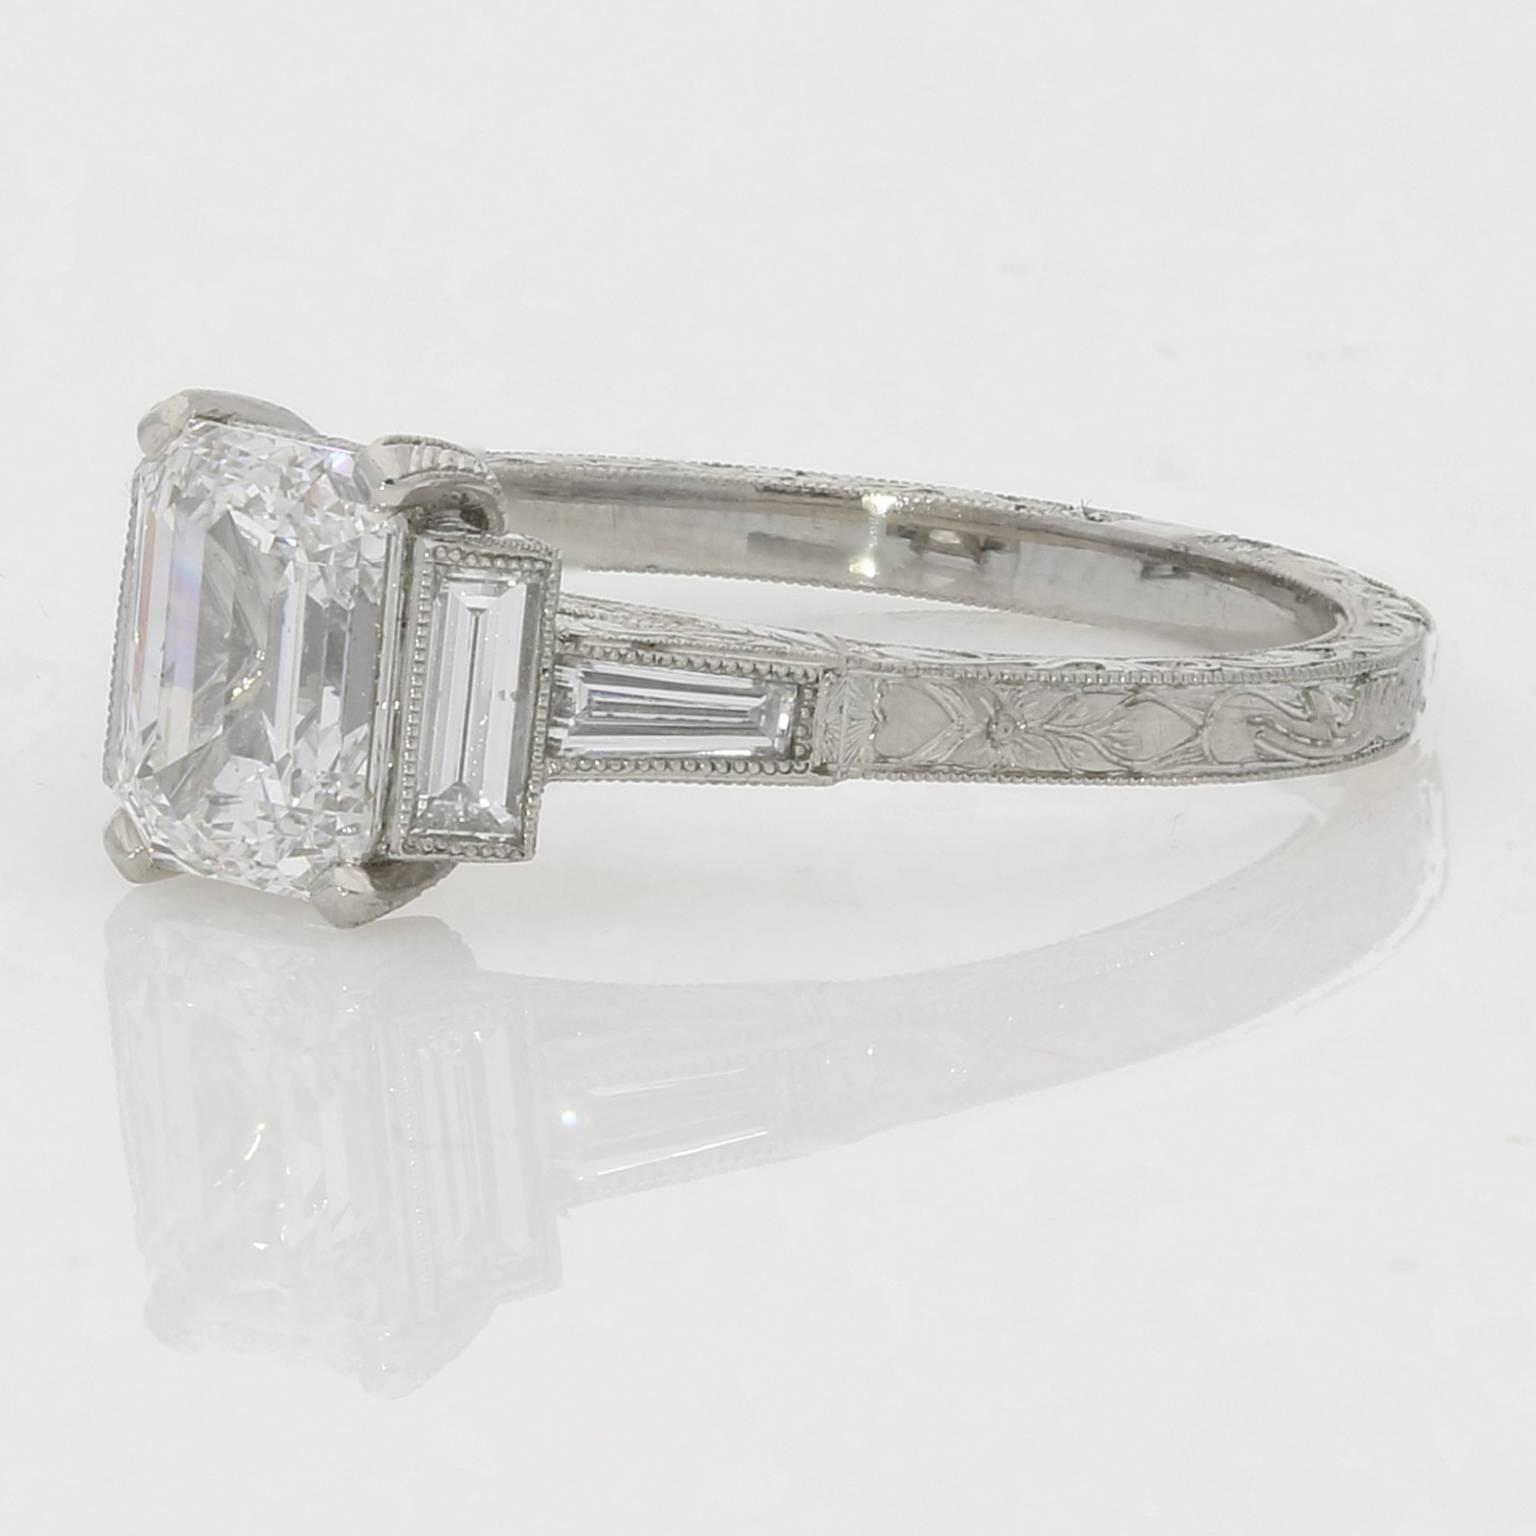 The centre diamond is claw set with a baguette diamond running parallel and a tapered baguette diamond leading into the hand-engraved platinum shank.

Hancocks, London

Contemporary

London, England

1.21ct D VS2 emerald cut diamond with GIA